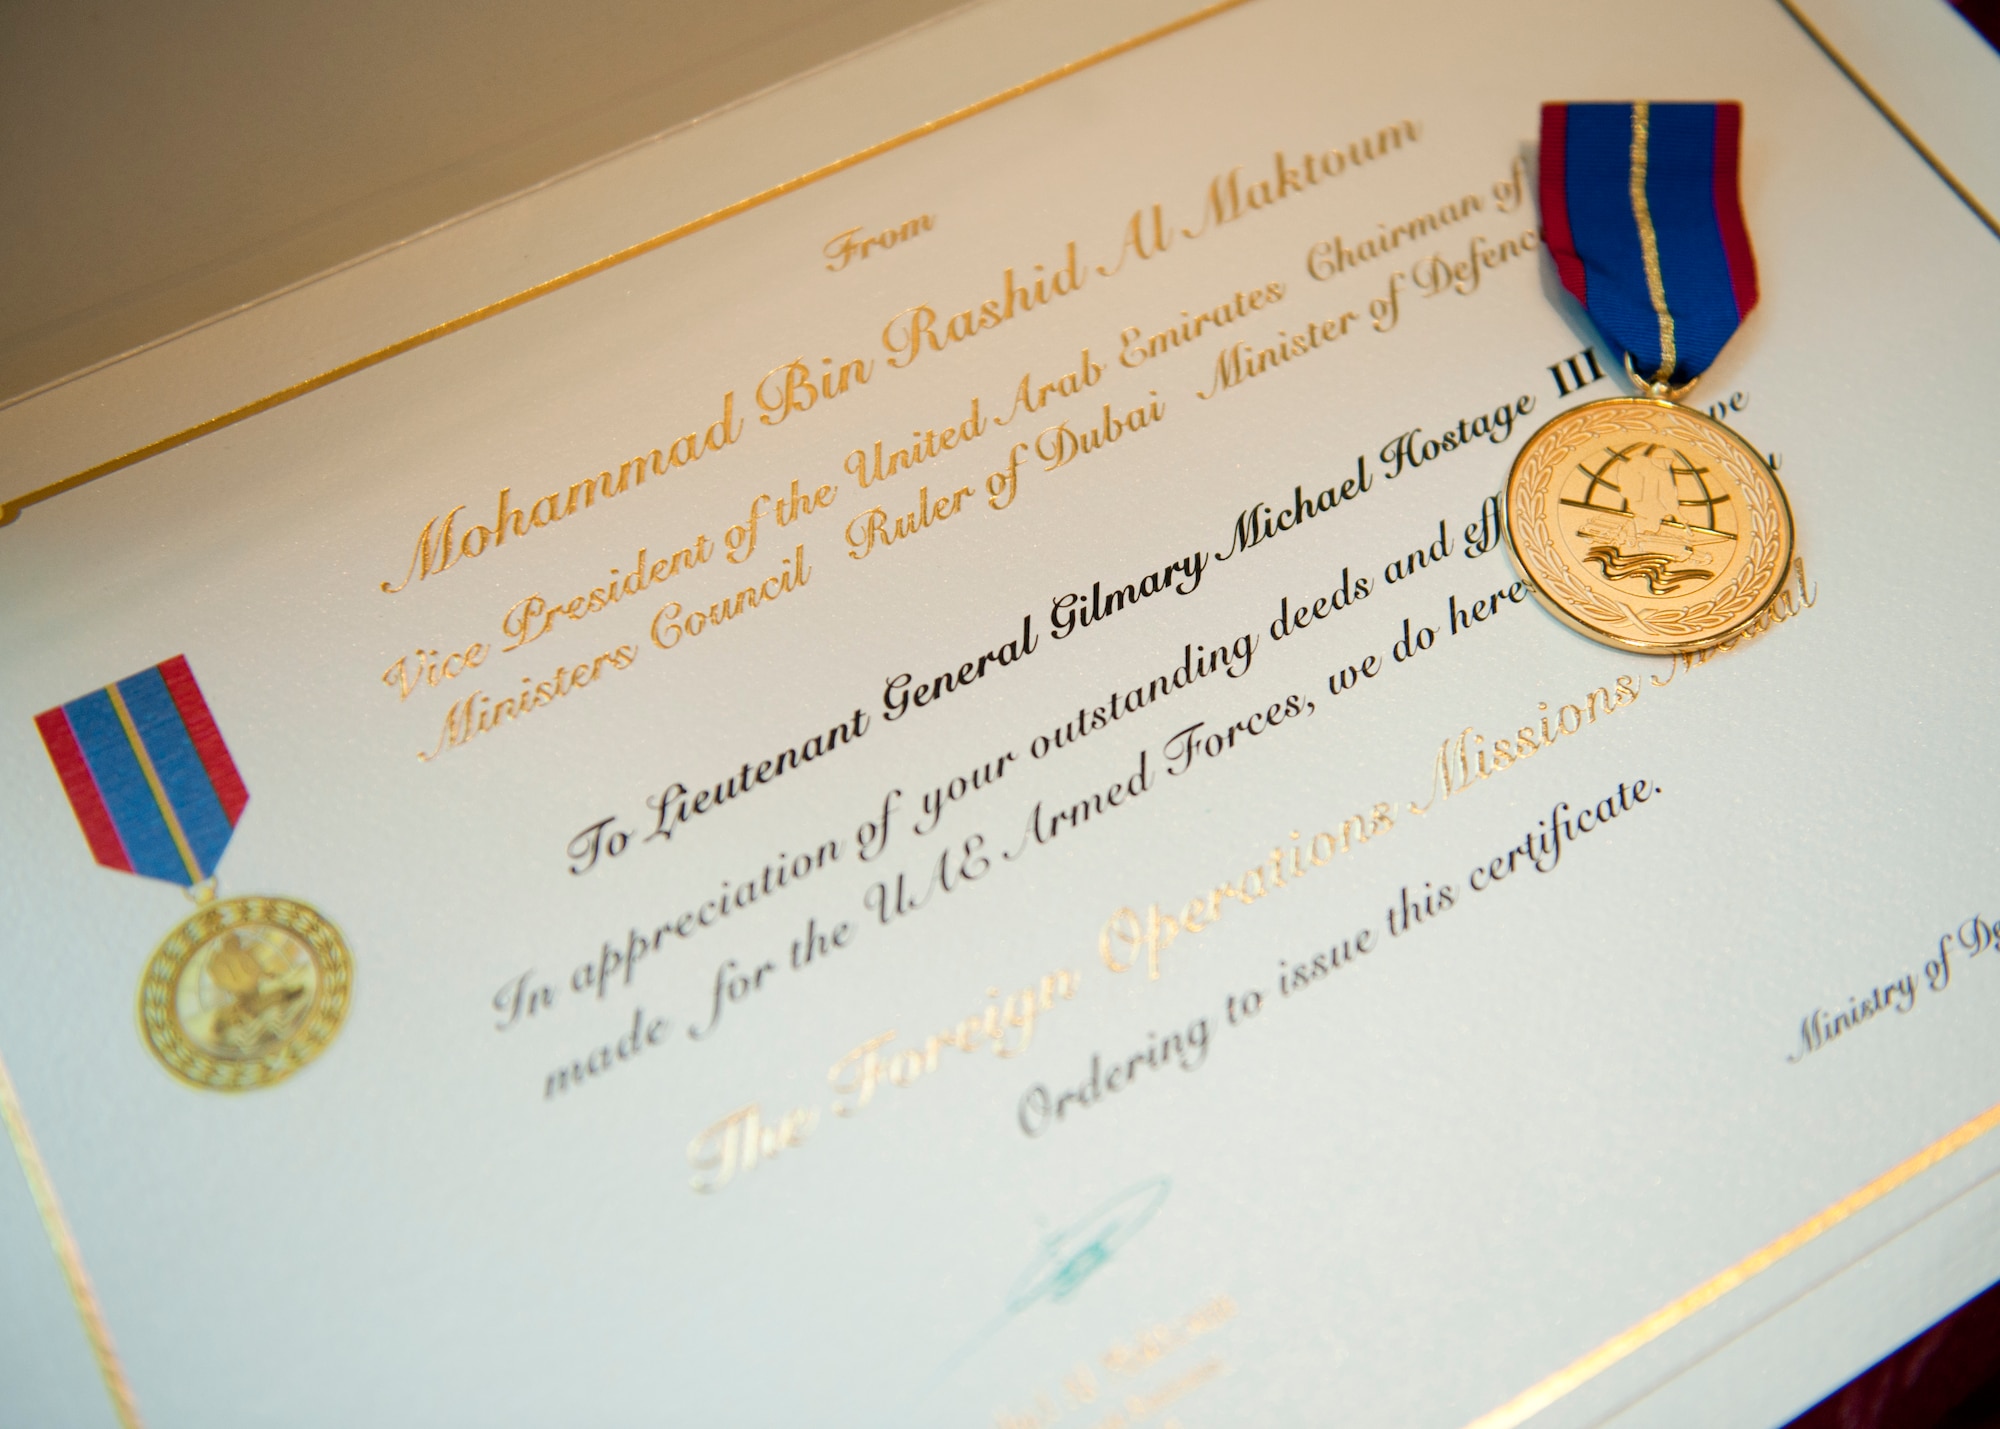 The Foreign Operations Medal and accompanying certificate that were presented to Air Combat Command commander, U.S. Air Force Gen. Mike Hostage III at the UAE Embassy, Washington D.C. on Nov. 15, 2011. (U.S. Air Force photo by Jim Varhegyi/Released)